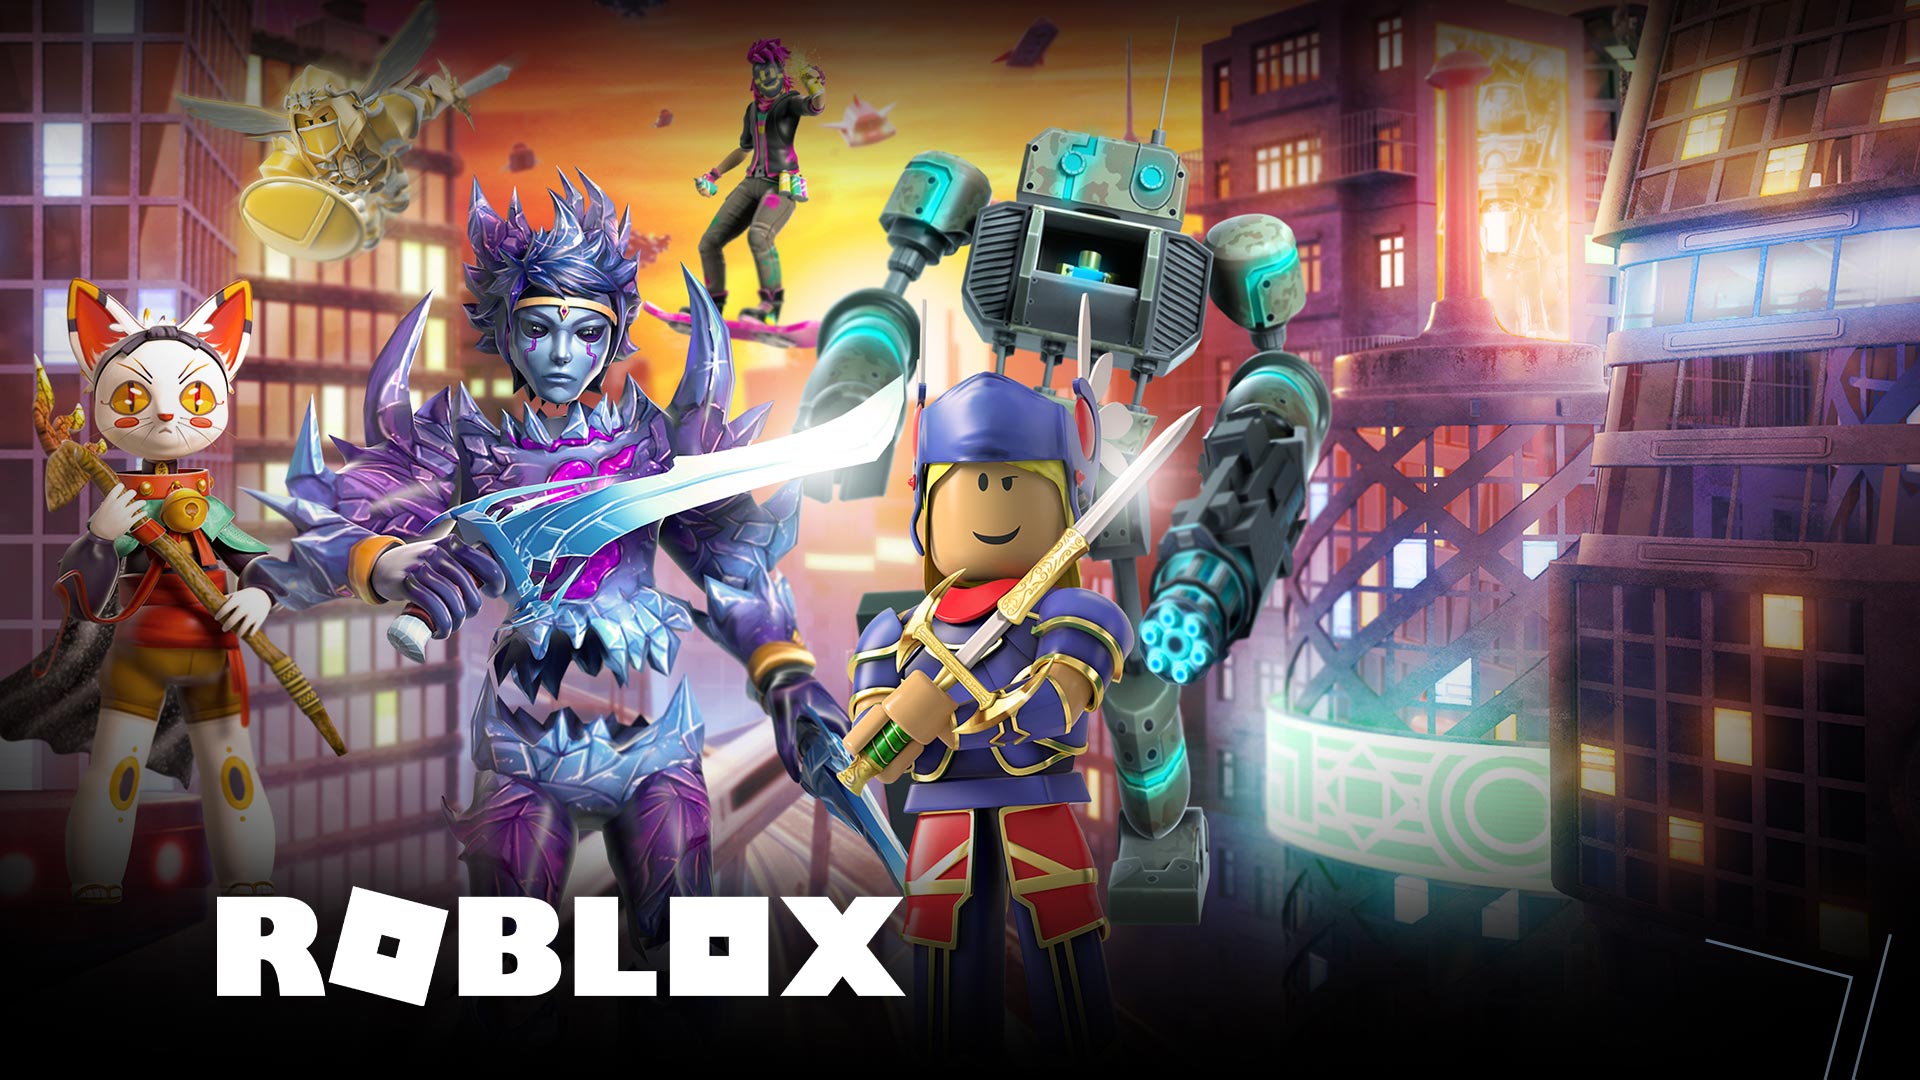 Several characters from Roblox posing